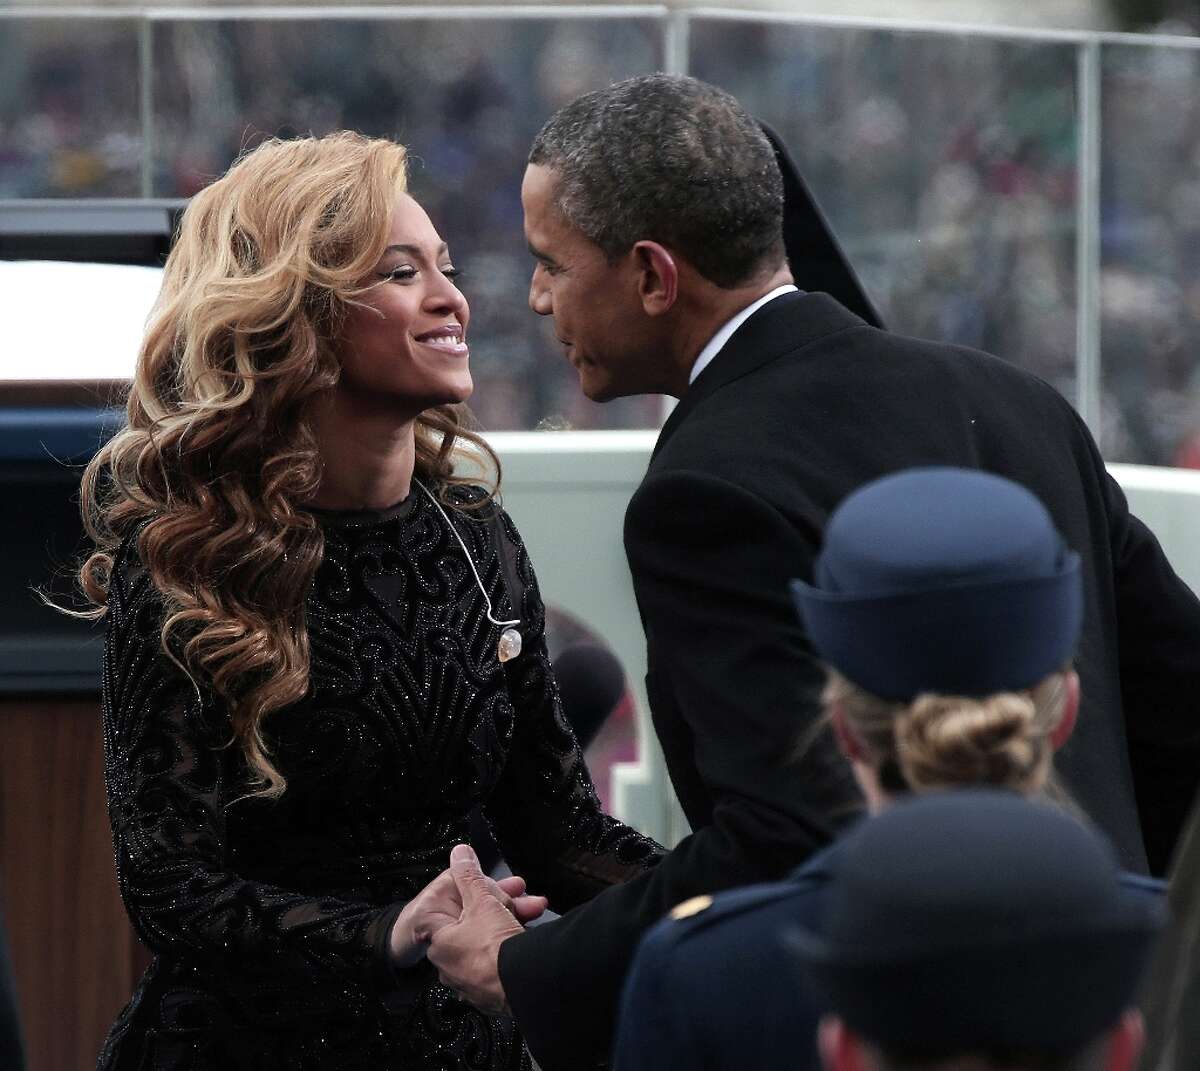 U.S. President Barack Obama greets singer Beyonce after she performs the National Anthem during the public ceremonial inauguration on the West Front of the U.S. Capitol January 21, 2013 in Washington, DC. Barack Obama was re-elected for a second term as President of the United States.